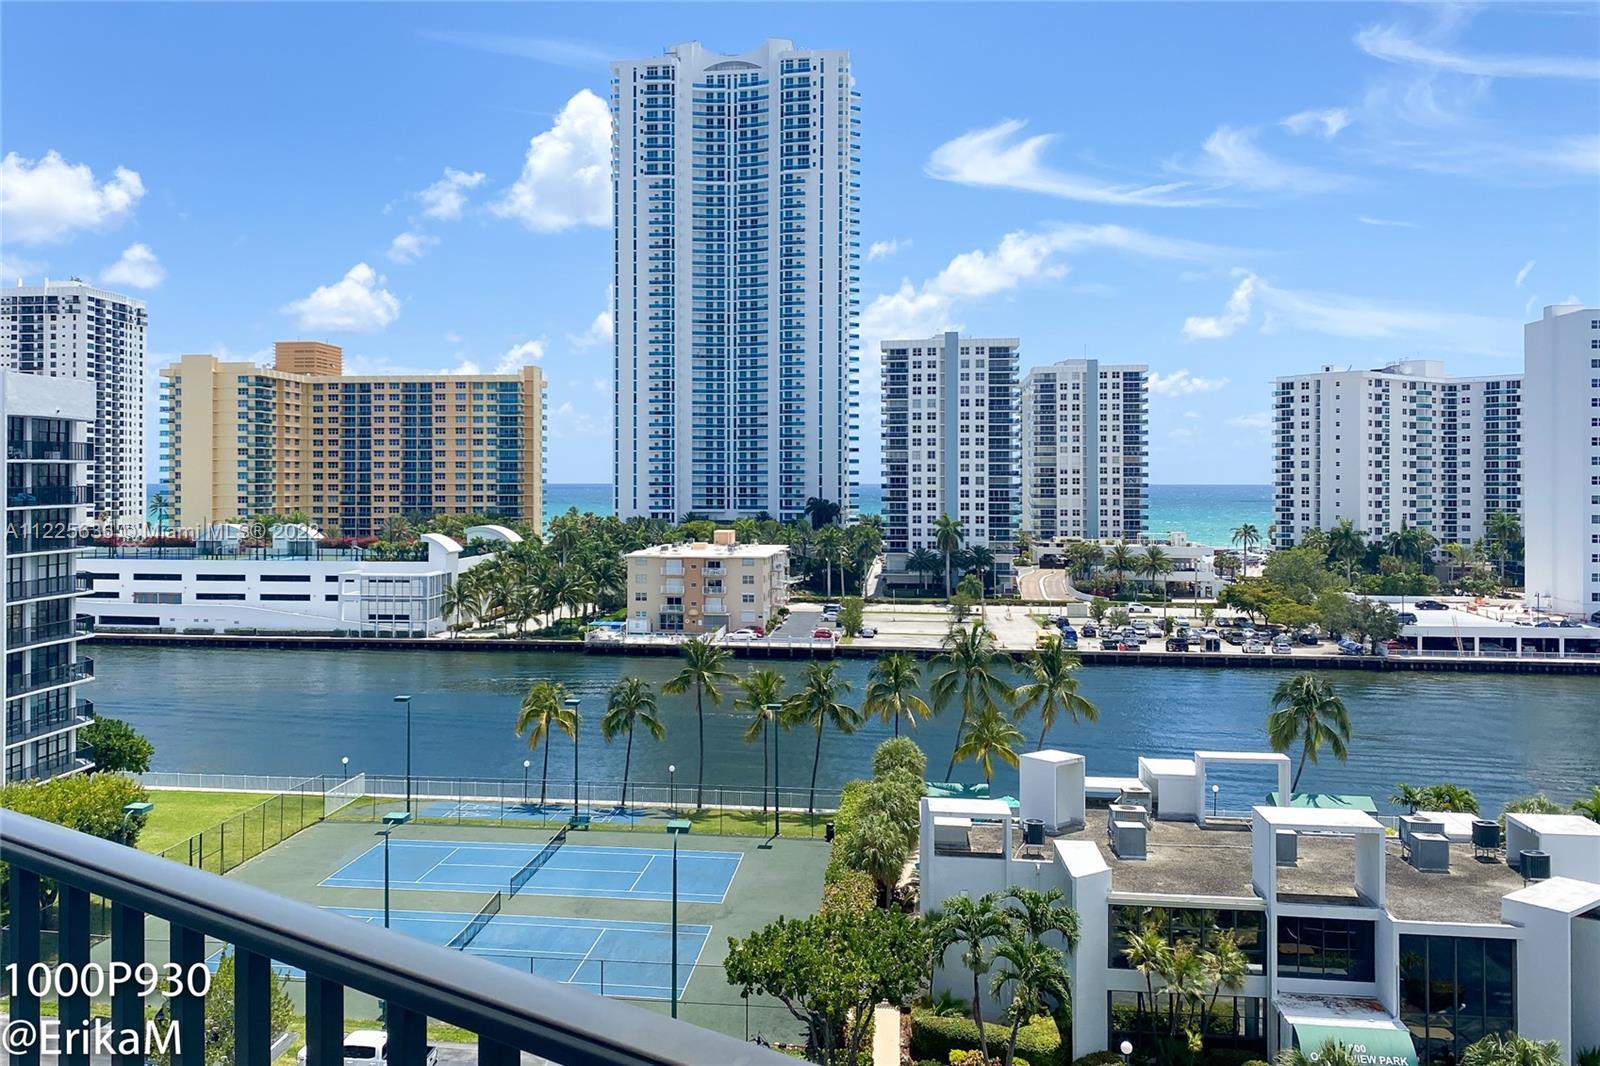 Intracoastal Views from floor to ceiling windows and Wraparound balcony. 2/2 plus convertible area c